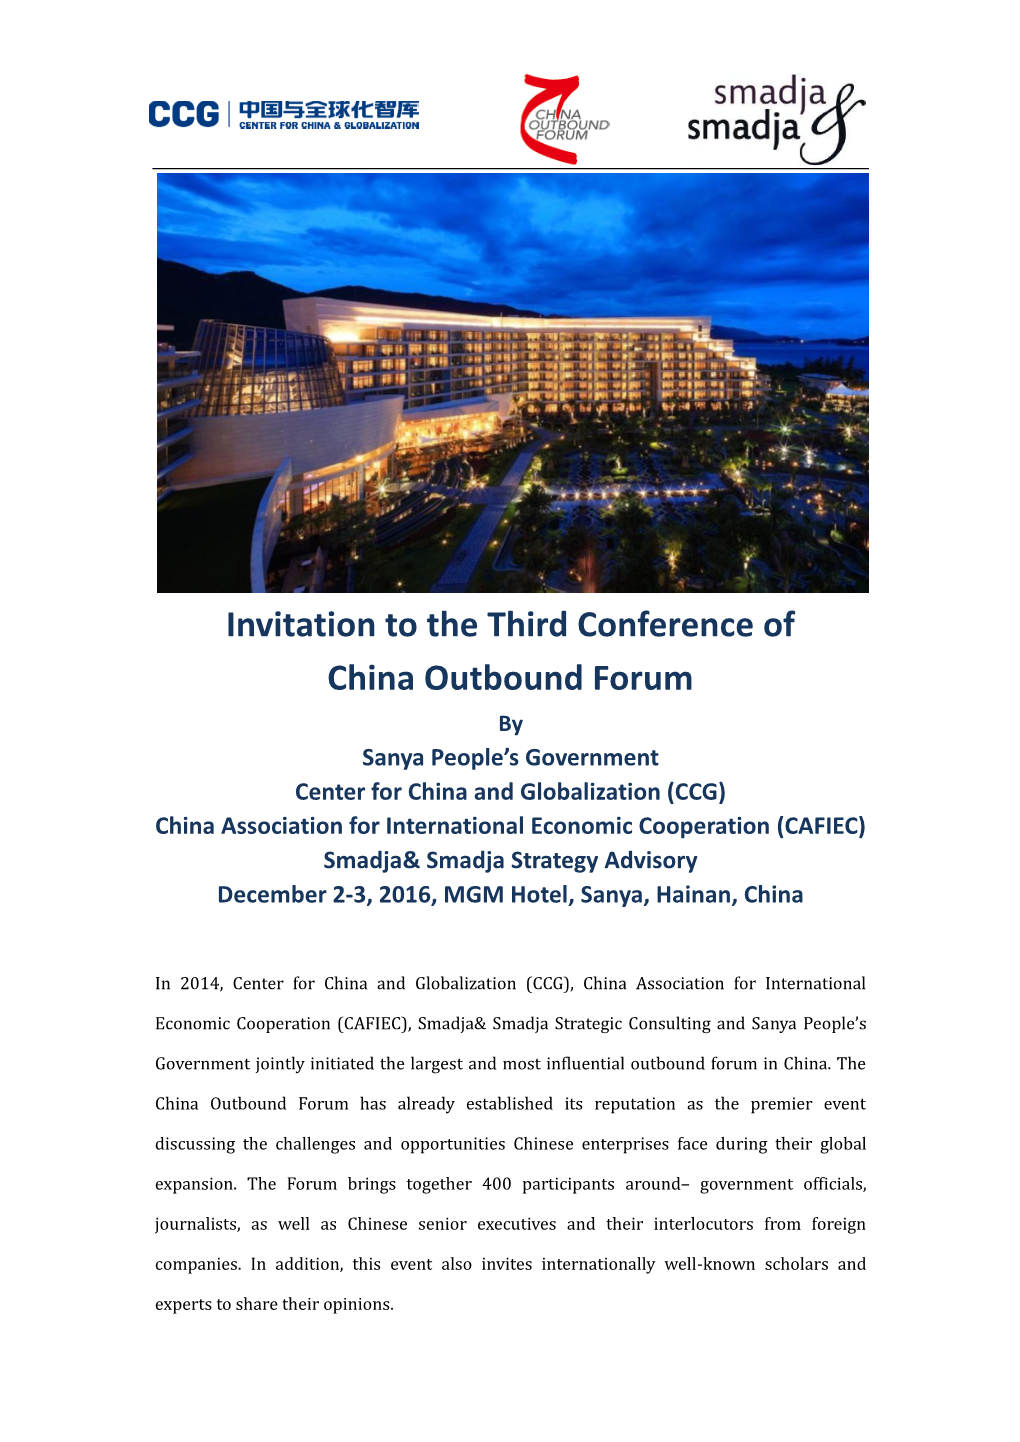 Invitation to the Third Conference of China Outbound Forum